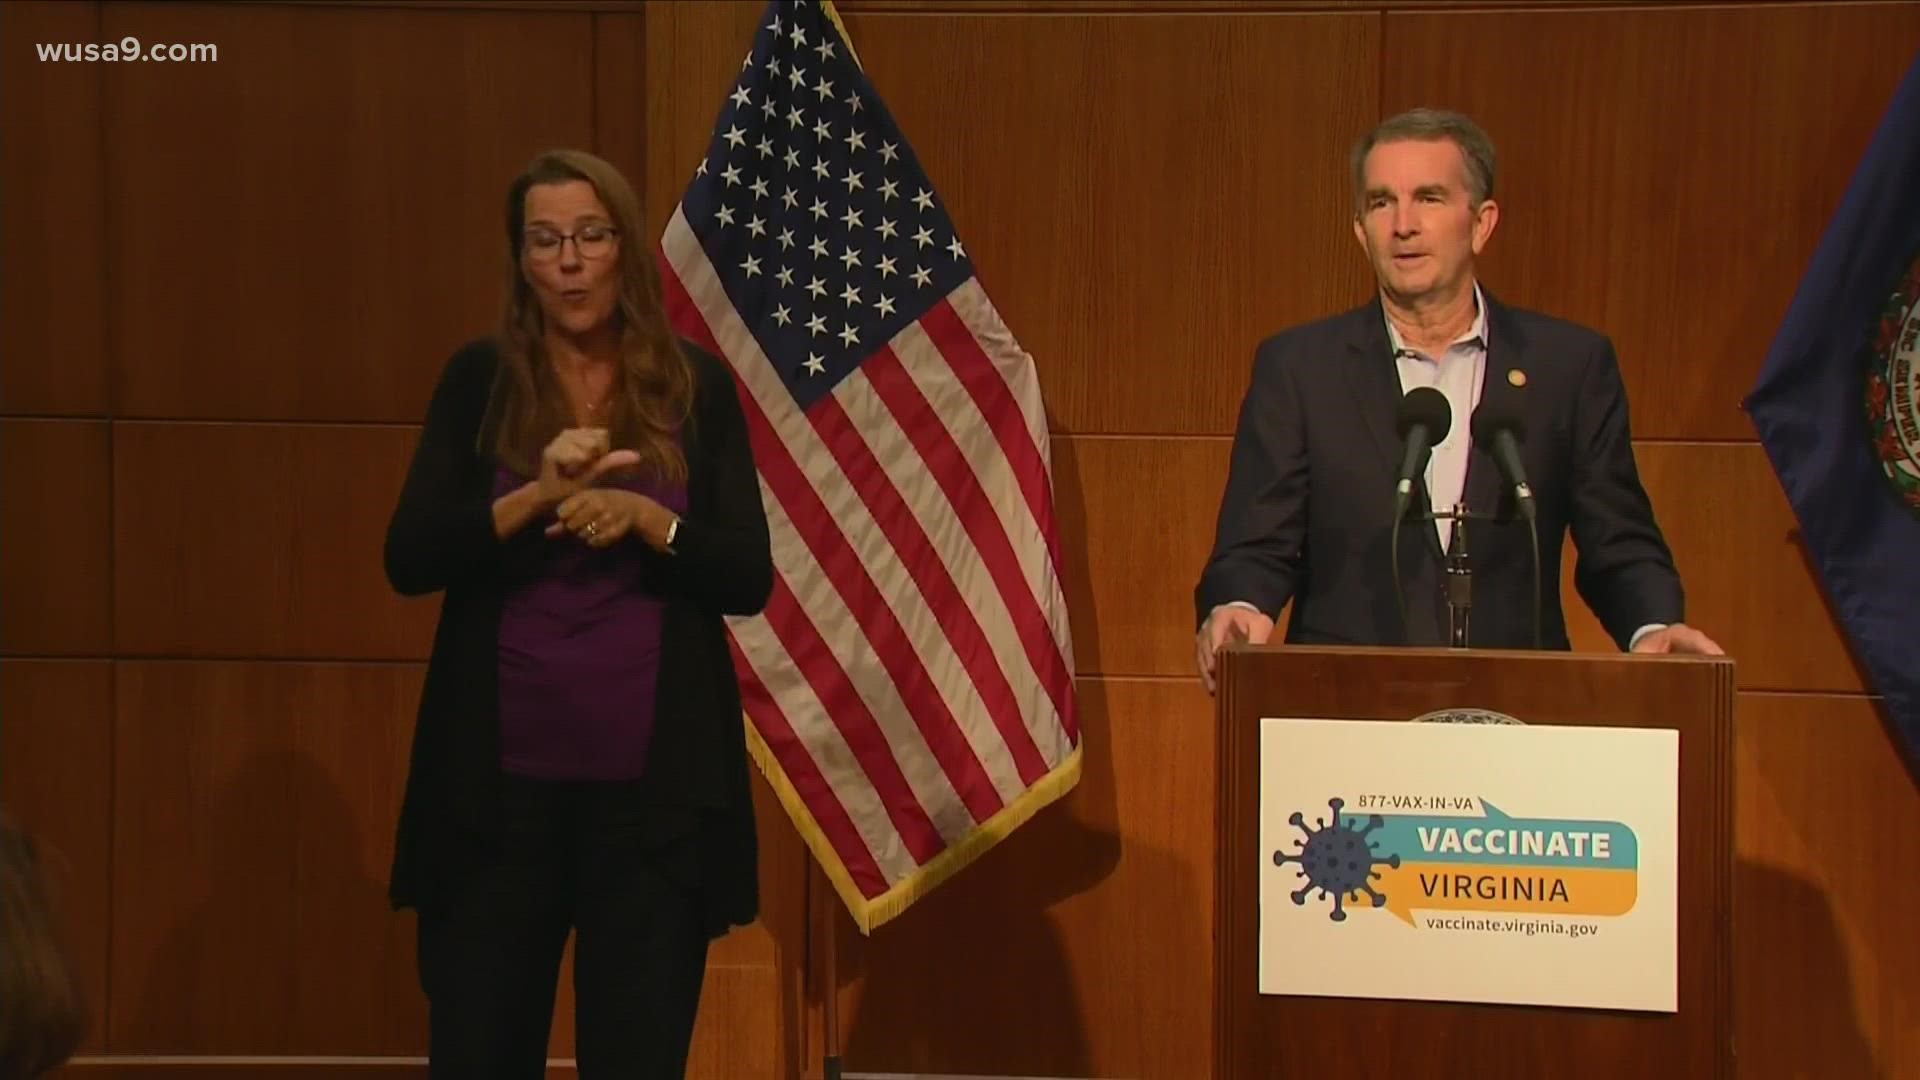 Virginia governor Ralph Northam holds a presser to provide updates on the coronavirus in his state.